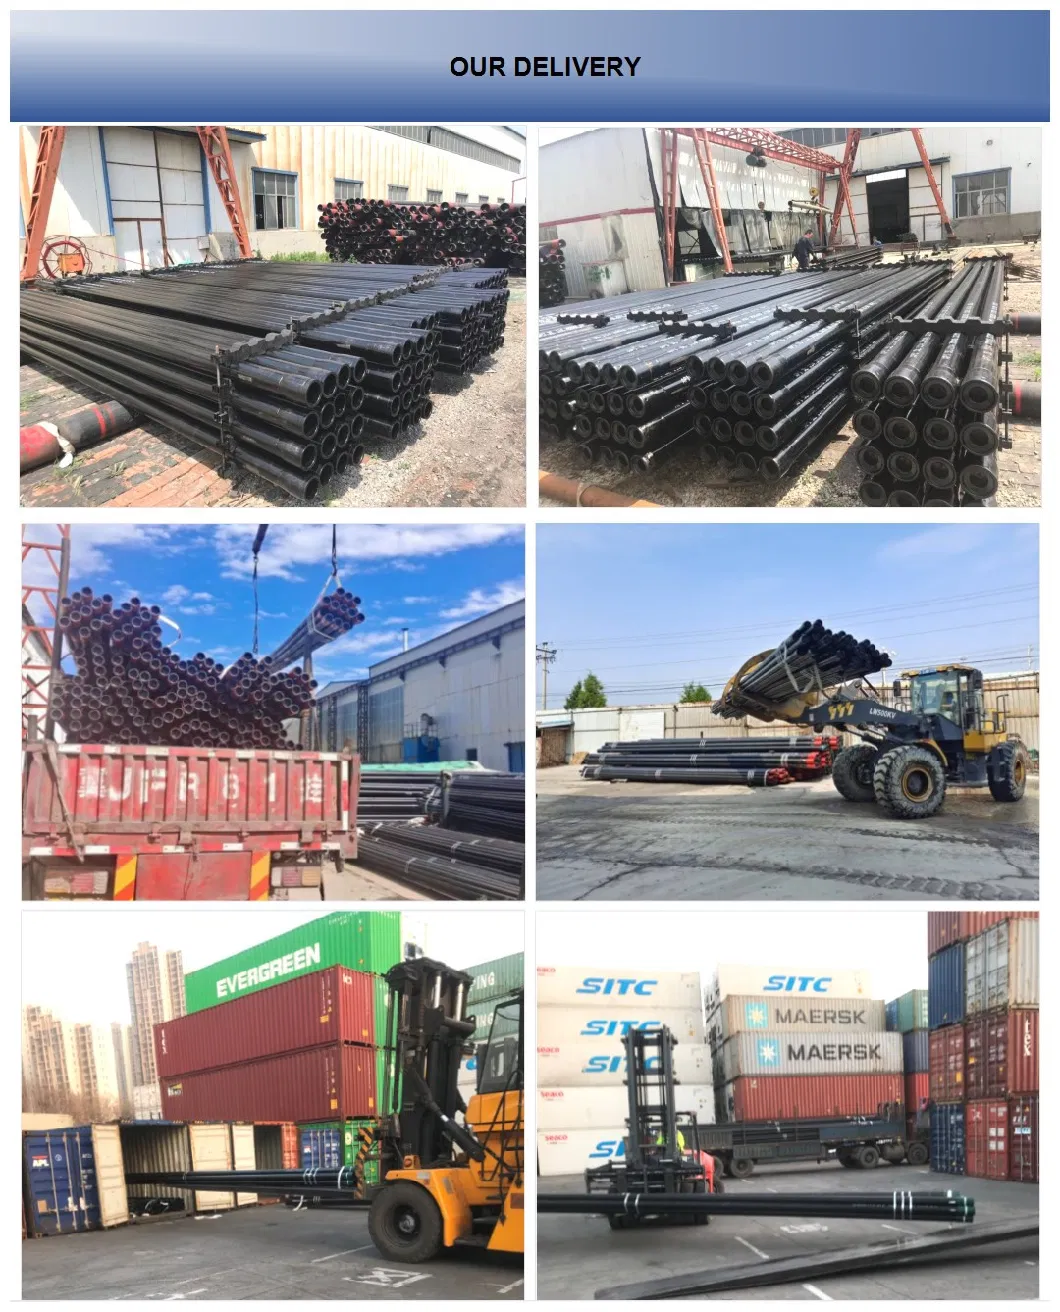 High Quality API Spec 5CT Galvanized Seamless Steel Pipe N80 (36Mn2V) L80 (13Cr) Oil Casing Range 1 4.88-7.62m with Pup Joint or Connector